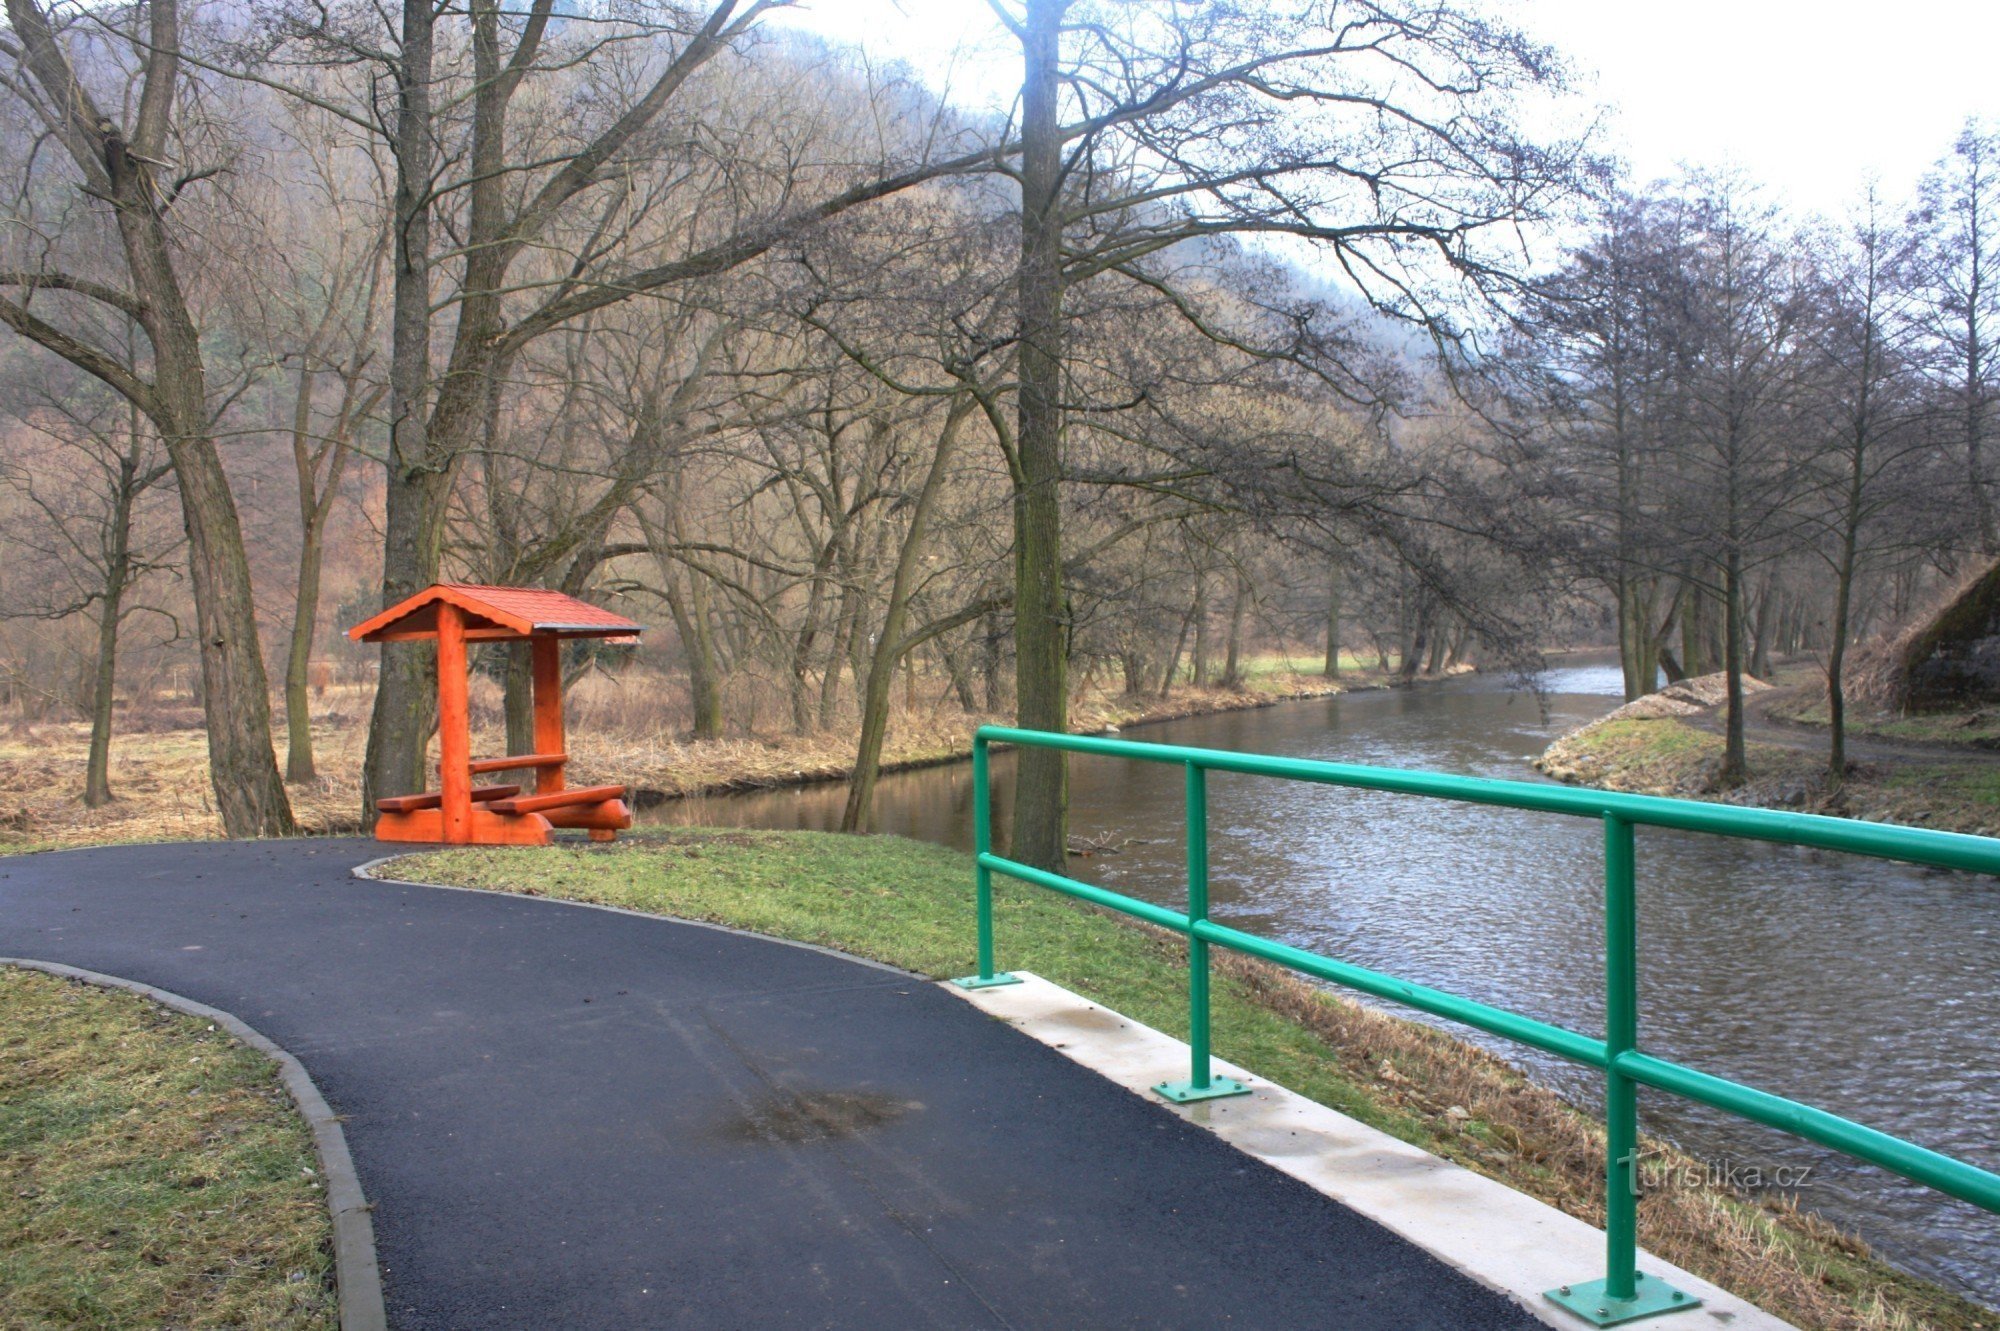 Cycle path at the confluence of Loučka and Svratka